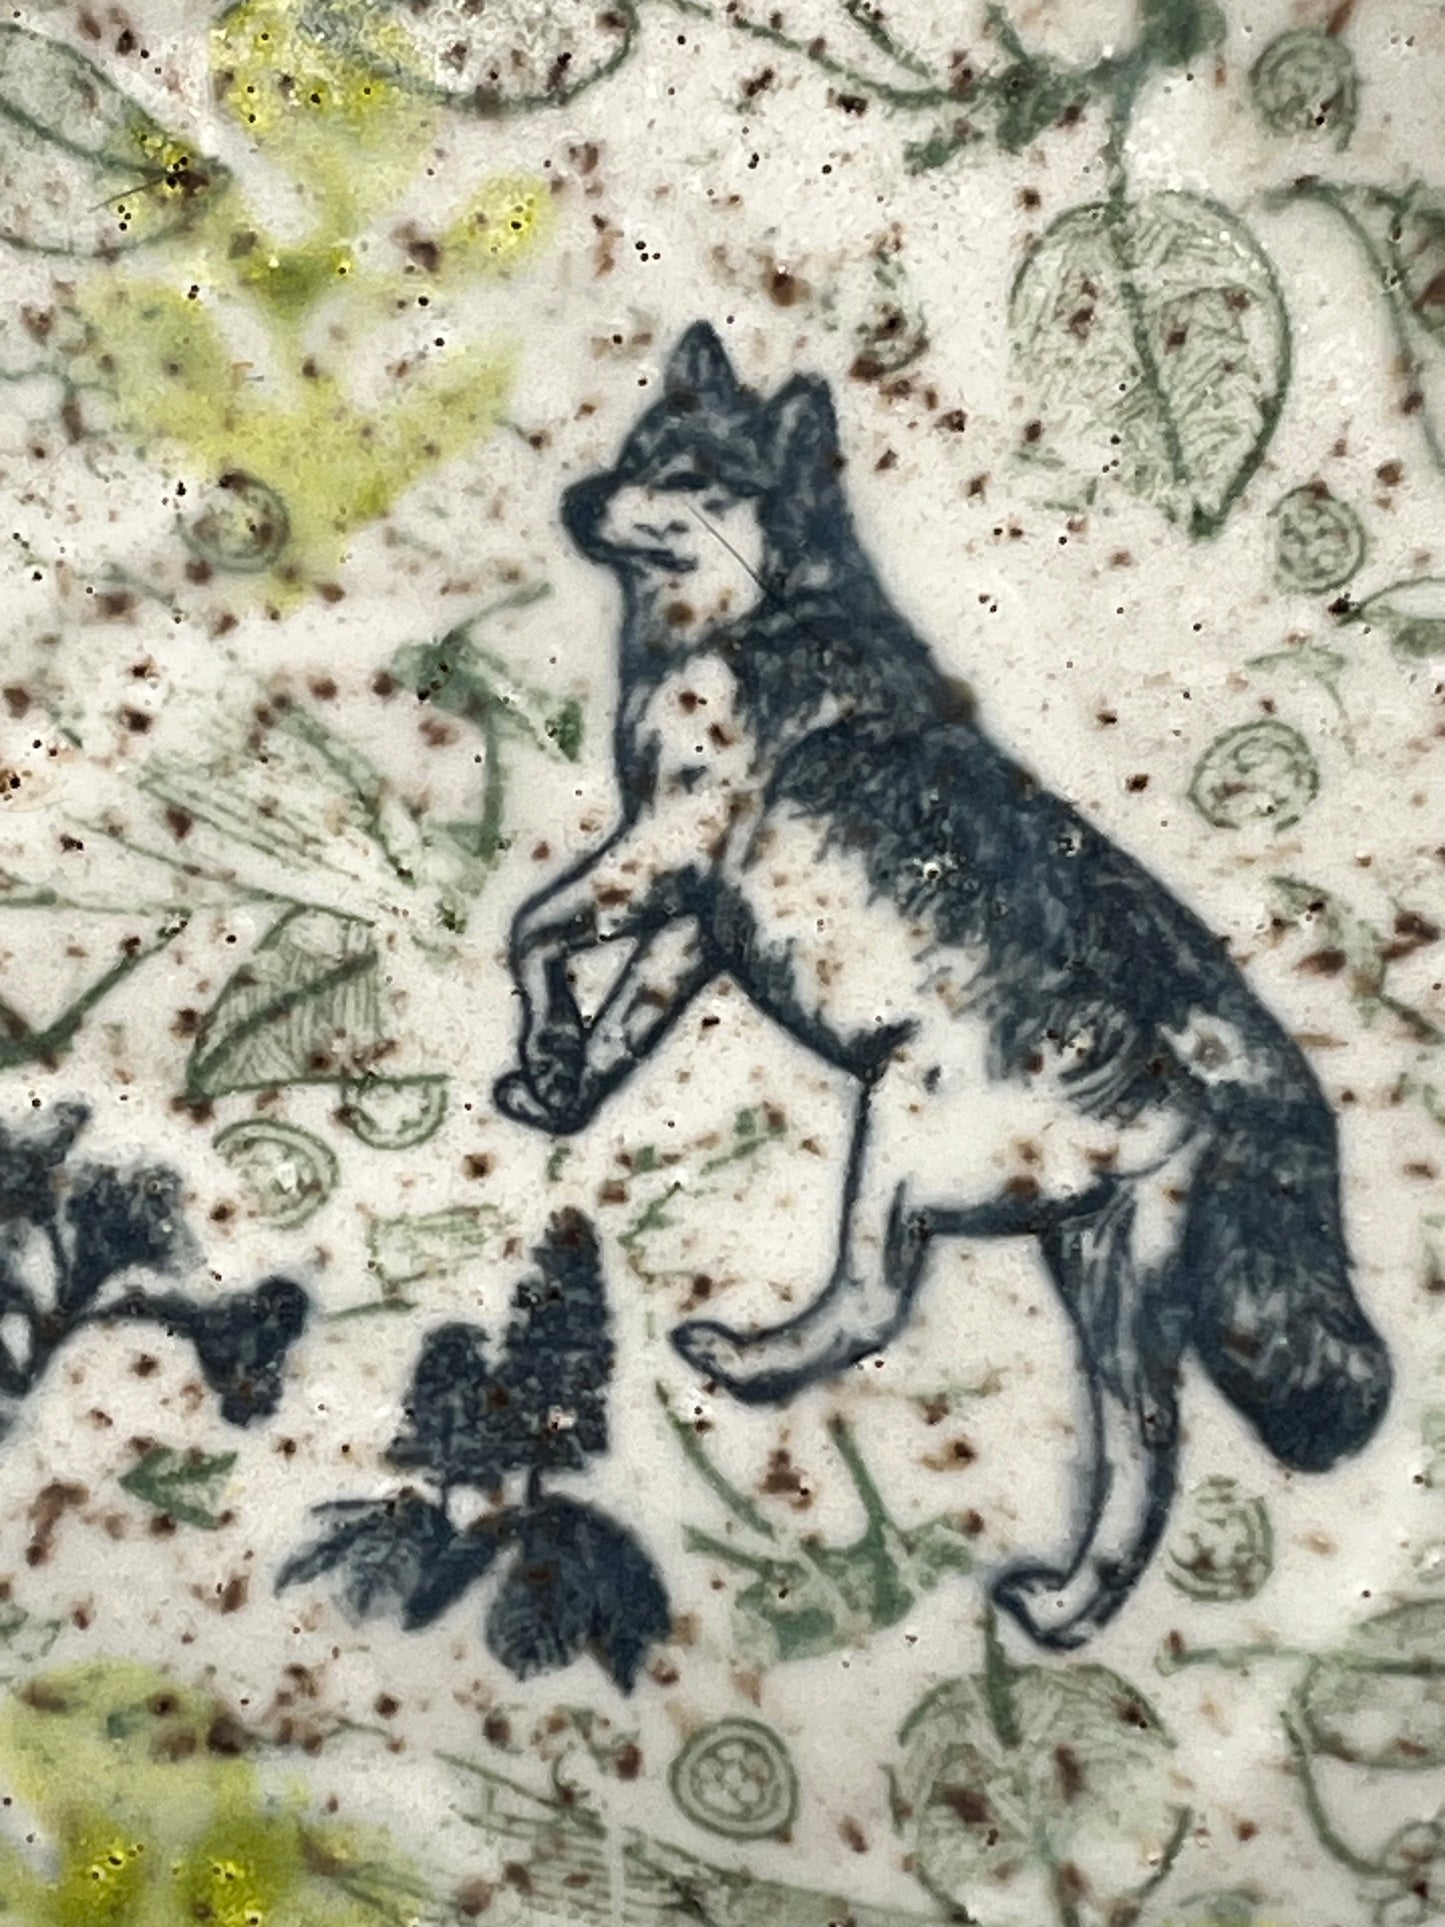 Wolf and Friend Bowl